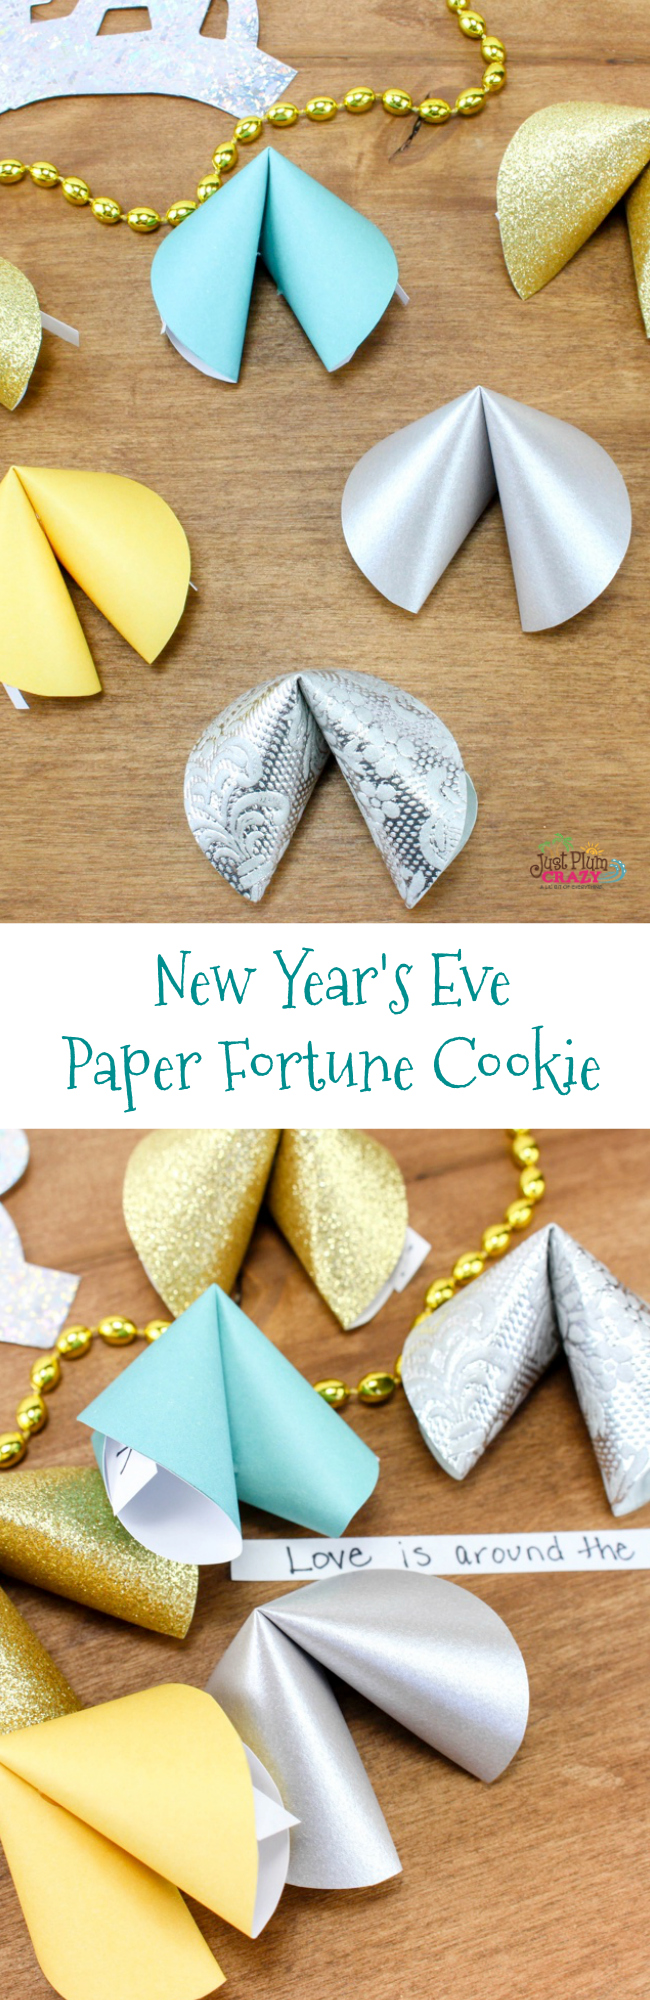 The Paper Fortune Cookies Craft is another fun party craft and favor for parents and kids to make for their New Year's Eve party celebration.